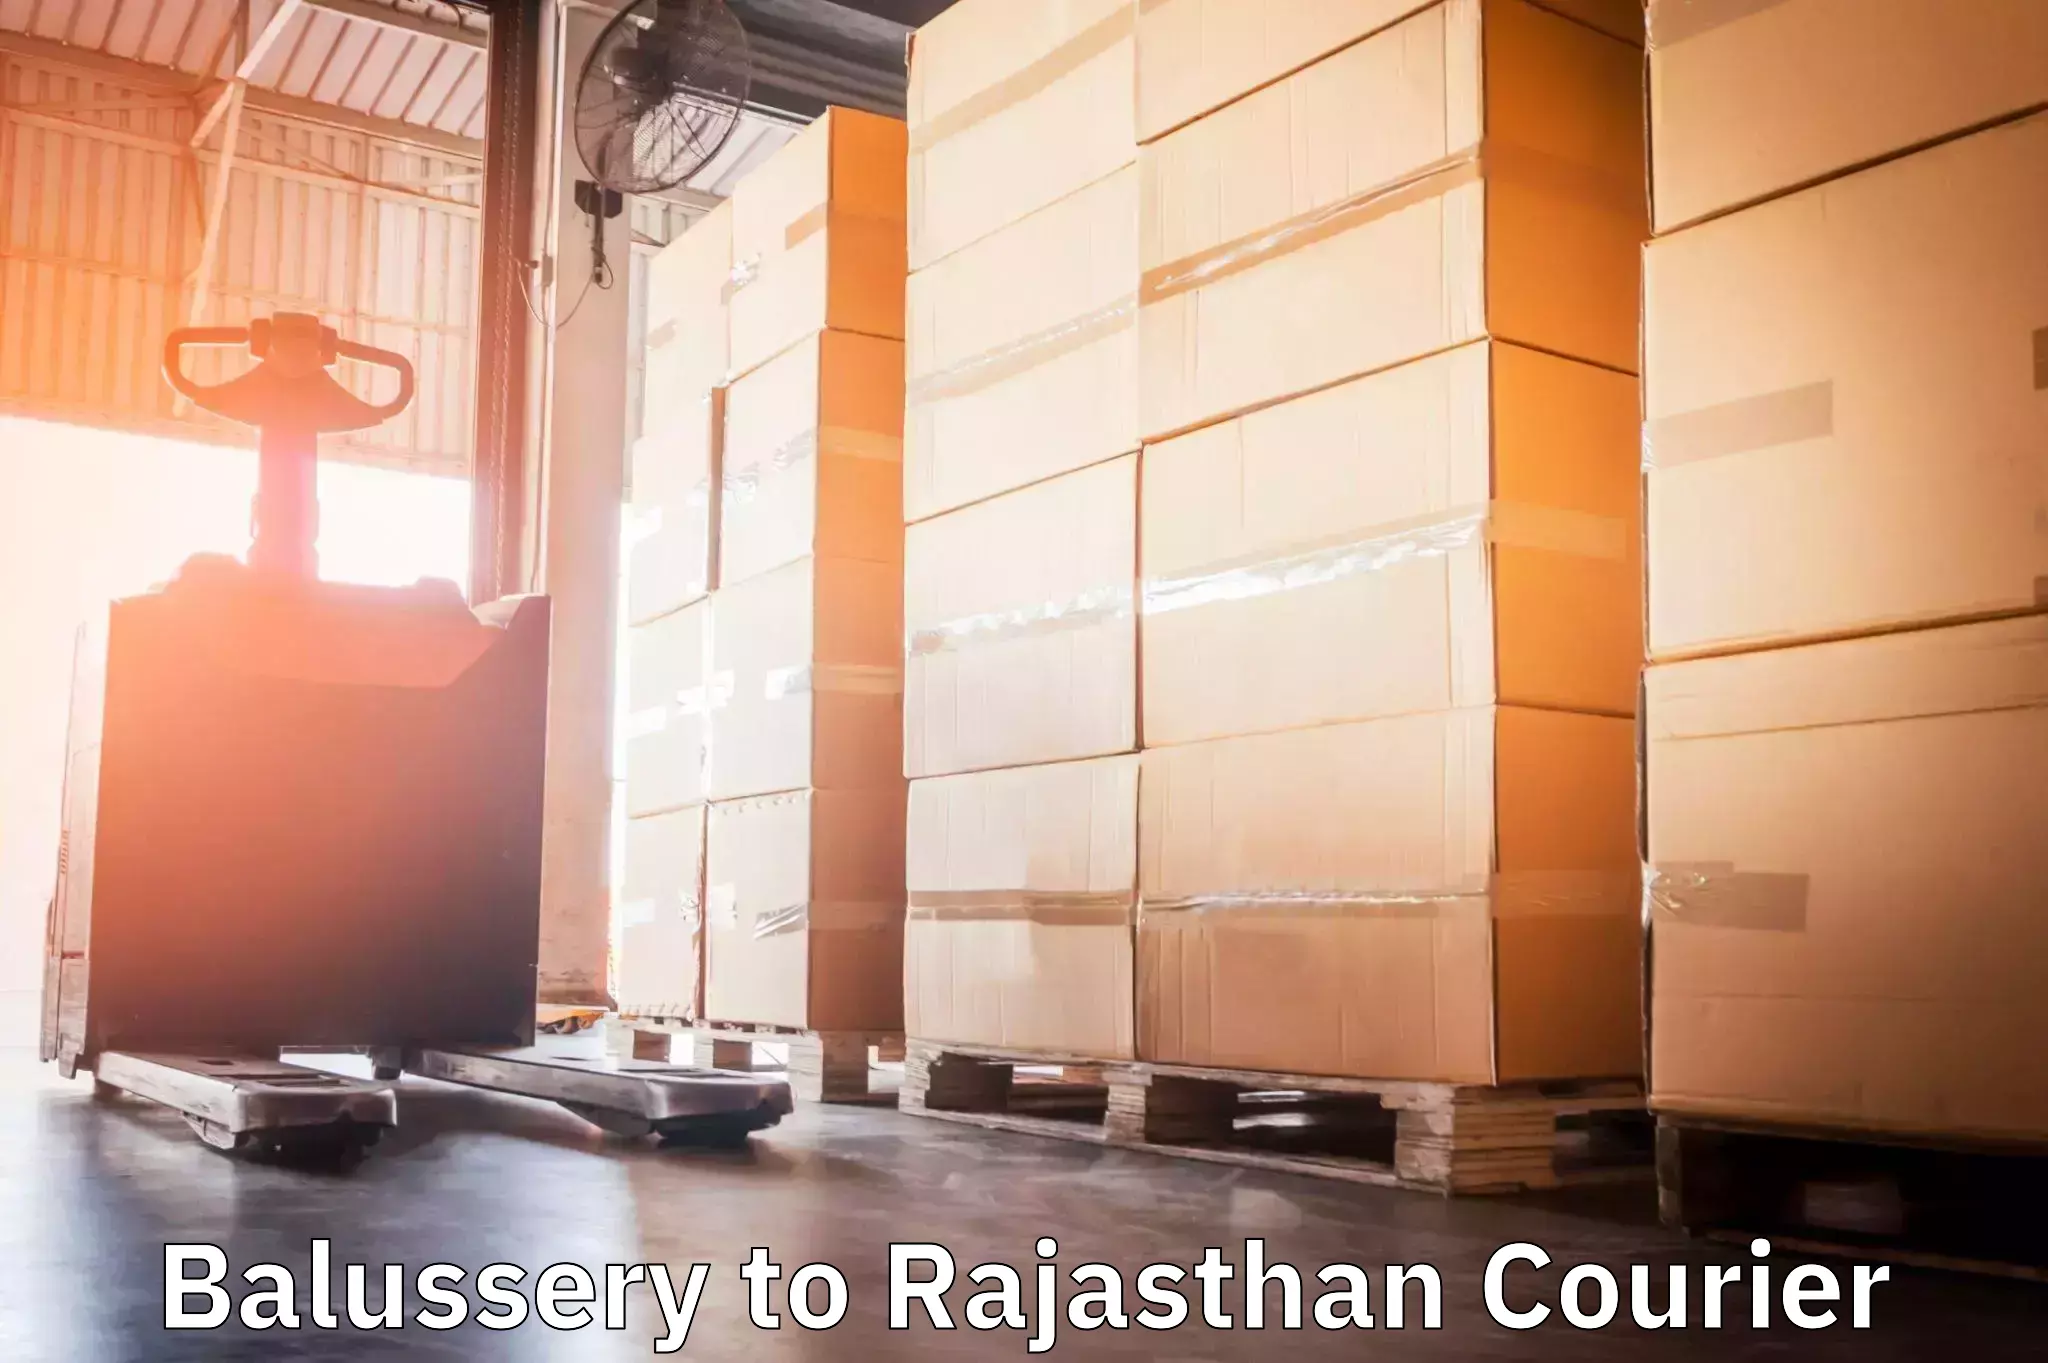 Courier service partnerships Balussery to Yeswanthapur